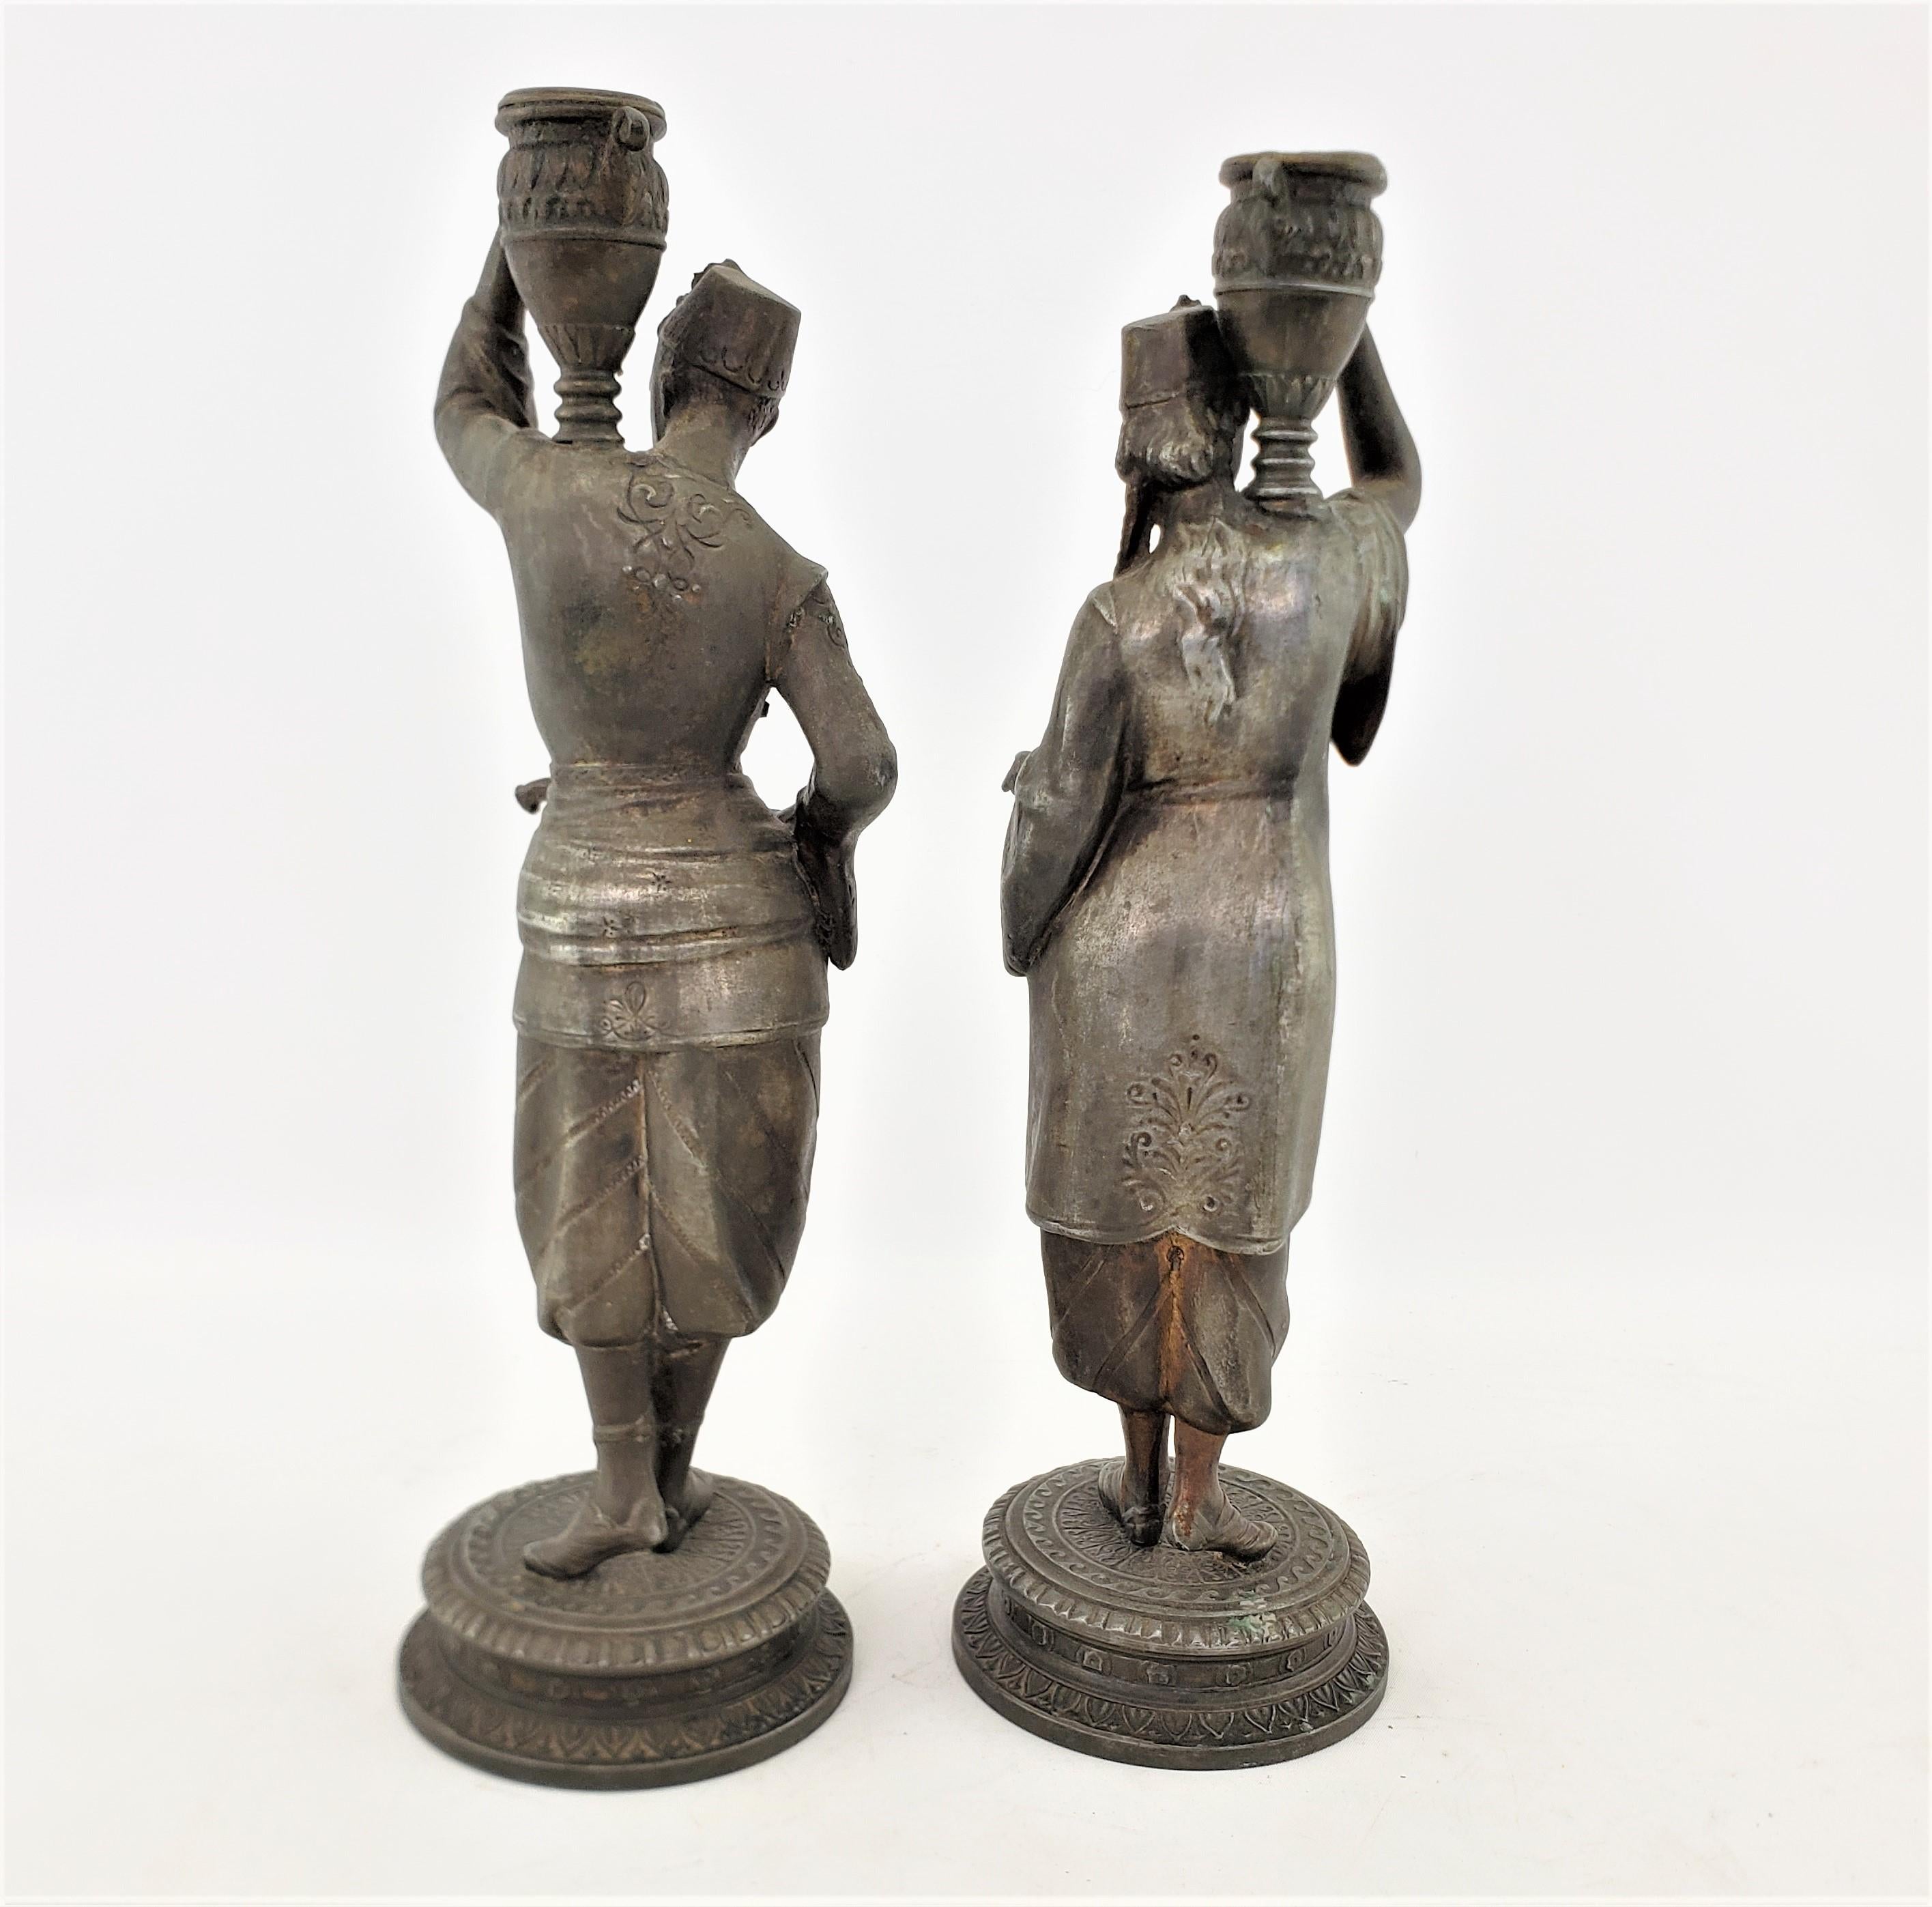 Pair of Antique Patinated Spelter Candlesticks of a Man & Woman Carrying Water In Good Condition For Sale In Hamilton, Ontario